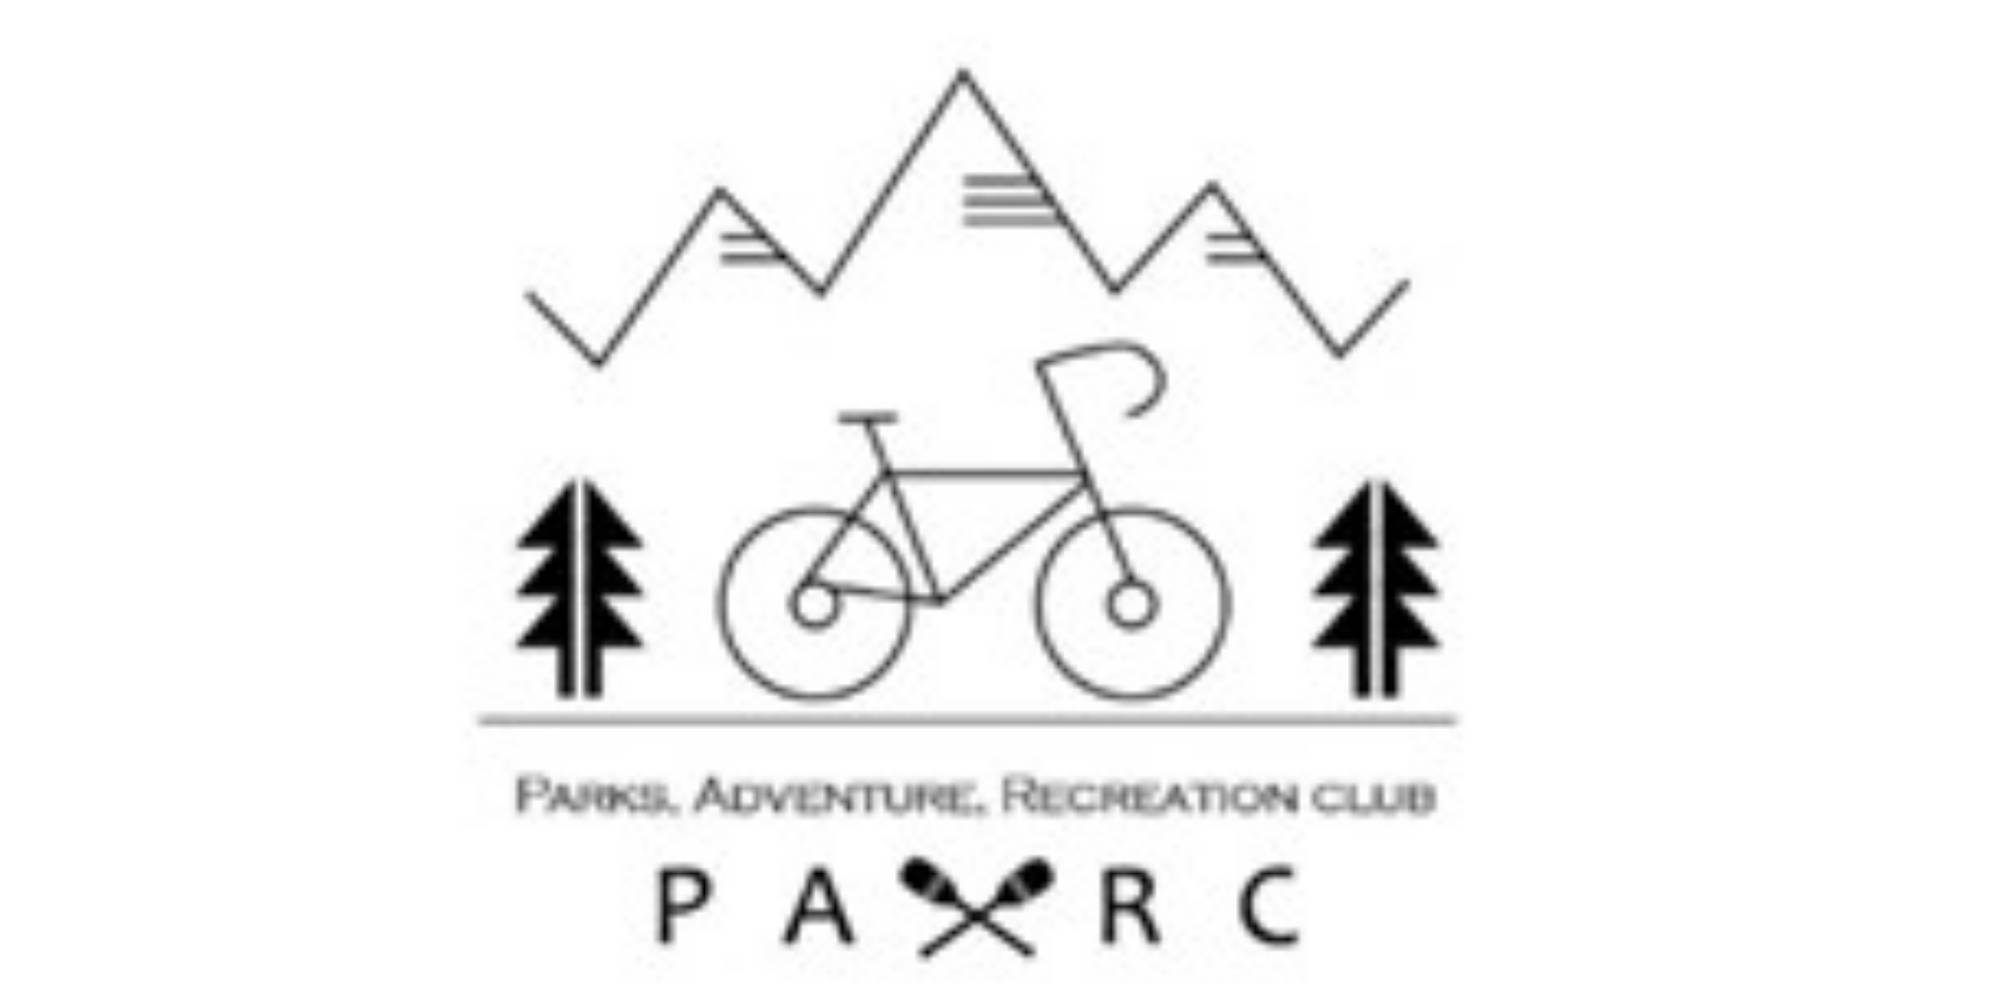 Parks, Adventure, and Recreation Logo